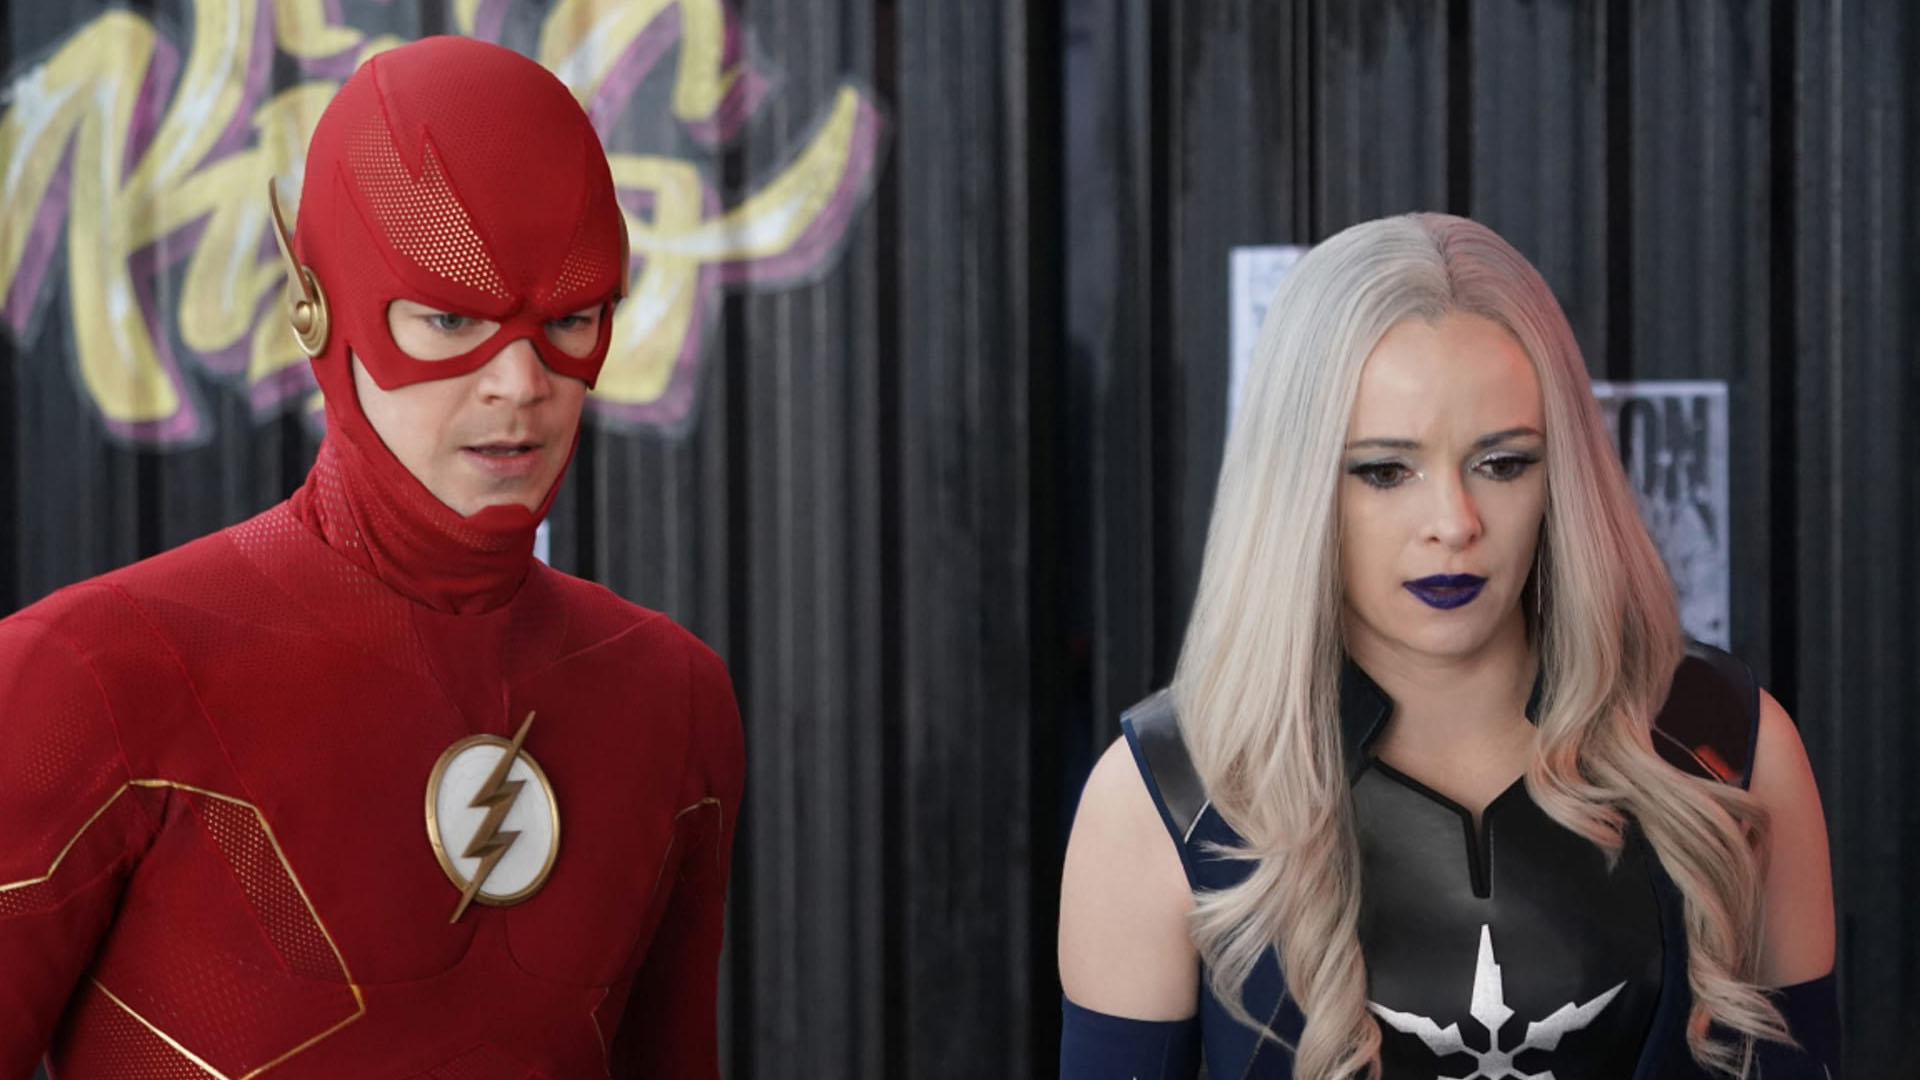 The duo is looking at someone. The Flash season 9 episode 12 review